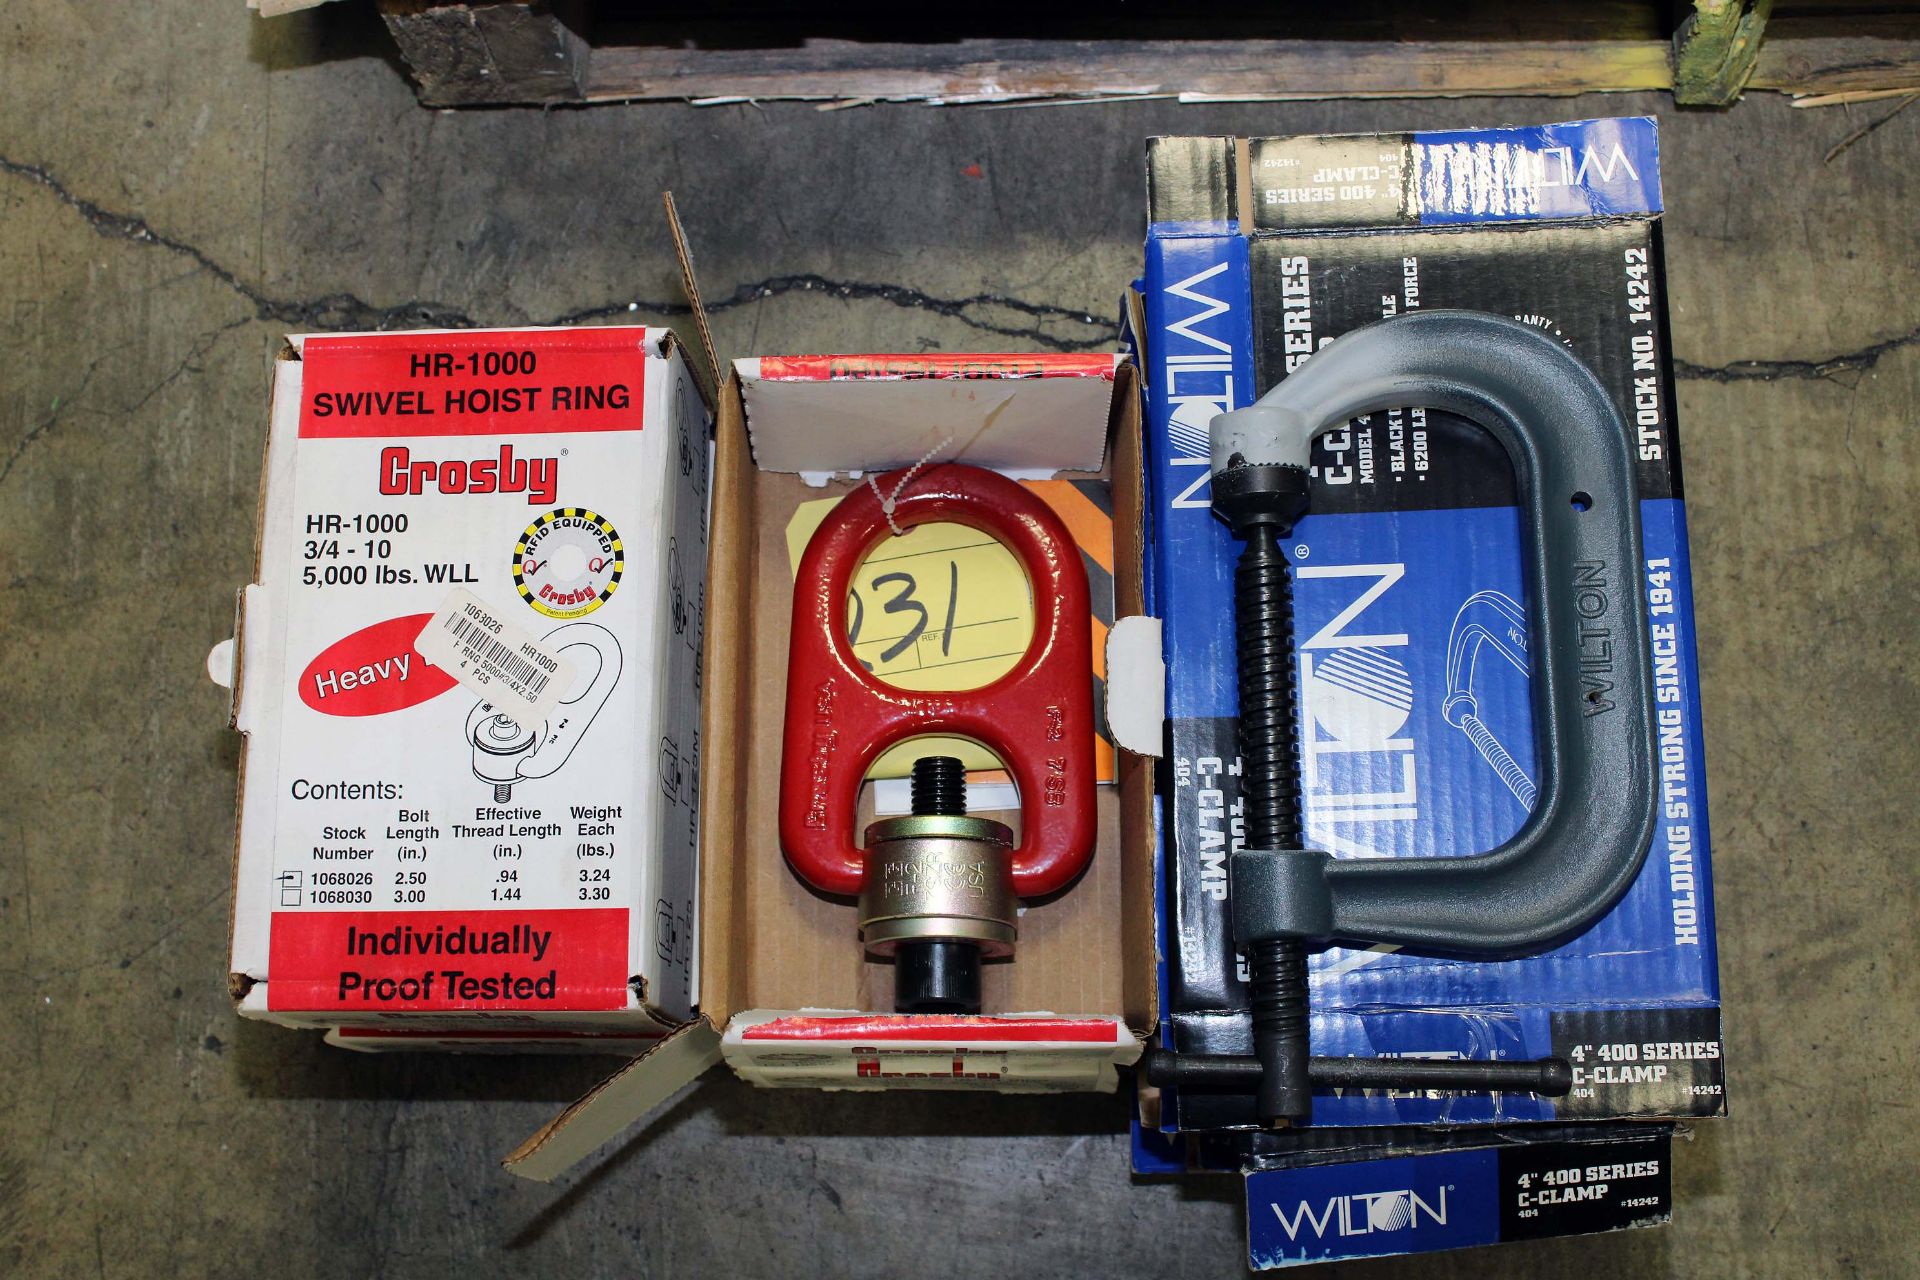 LOT CONSISTING OF: (5) Wilton 4" C-clamps & (4) Crosby Mdl. HR-1000 swivel hoist rings - 3/4-10 5,